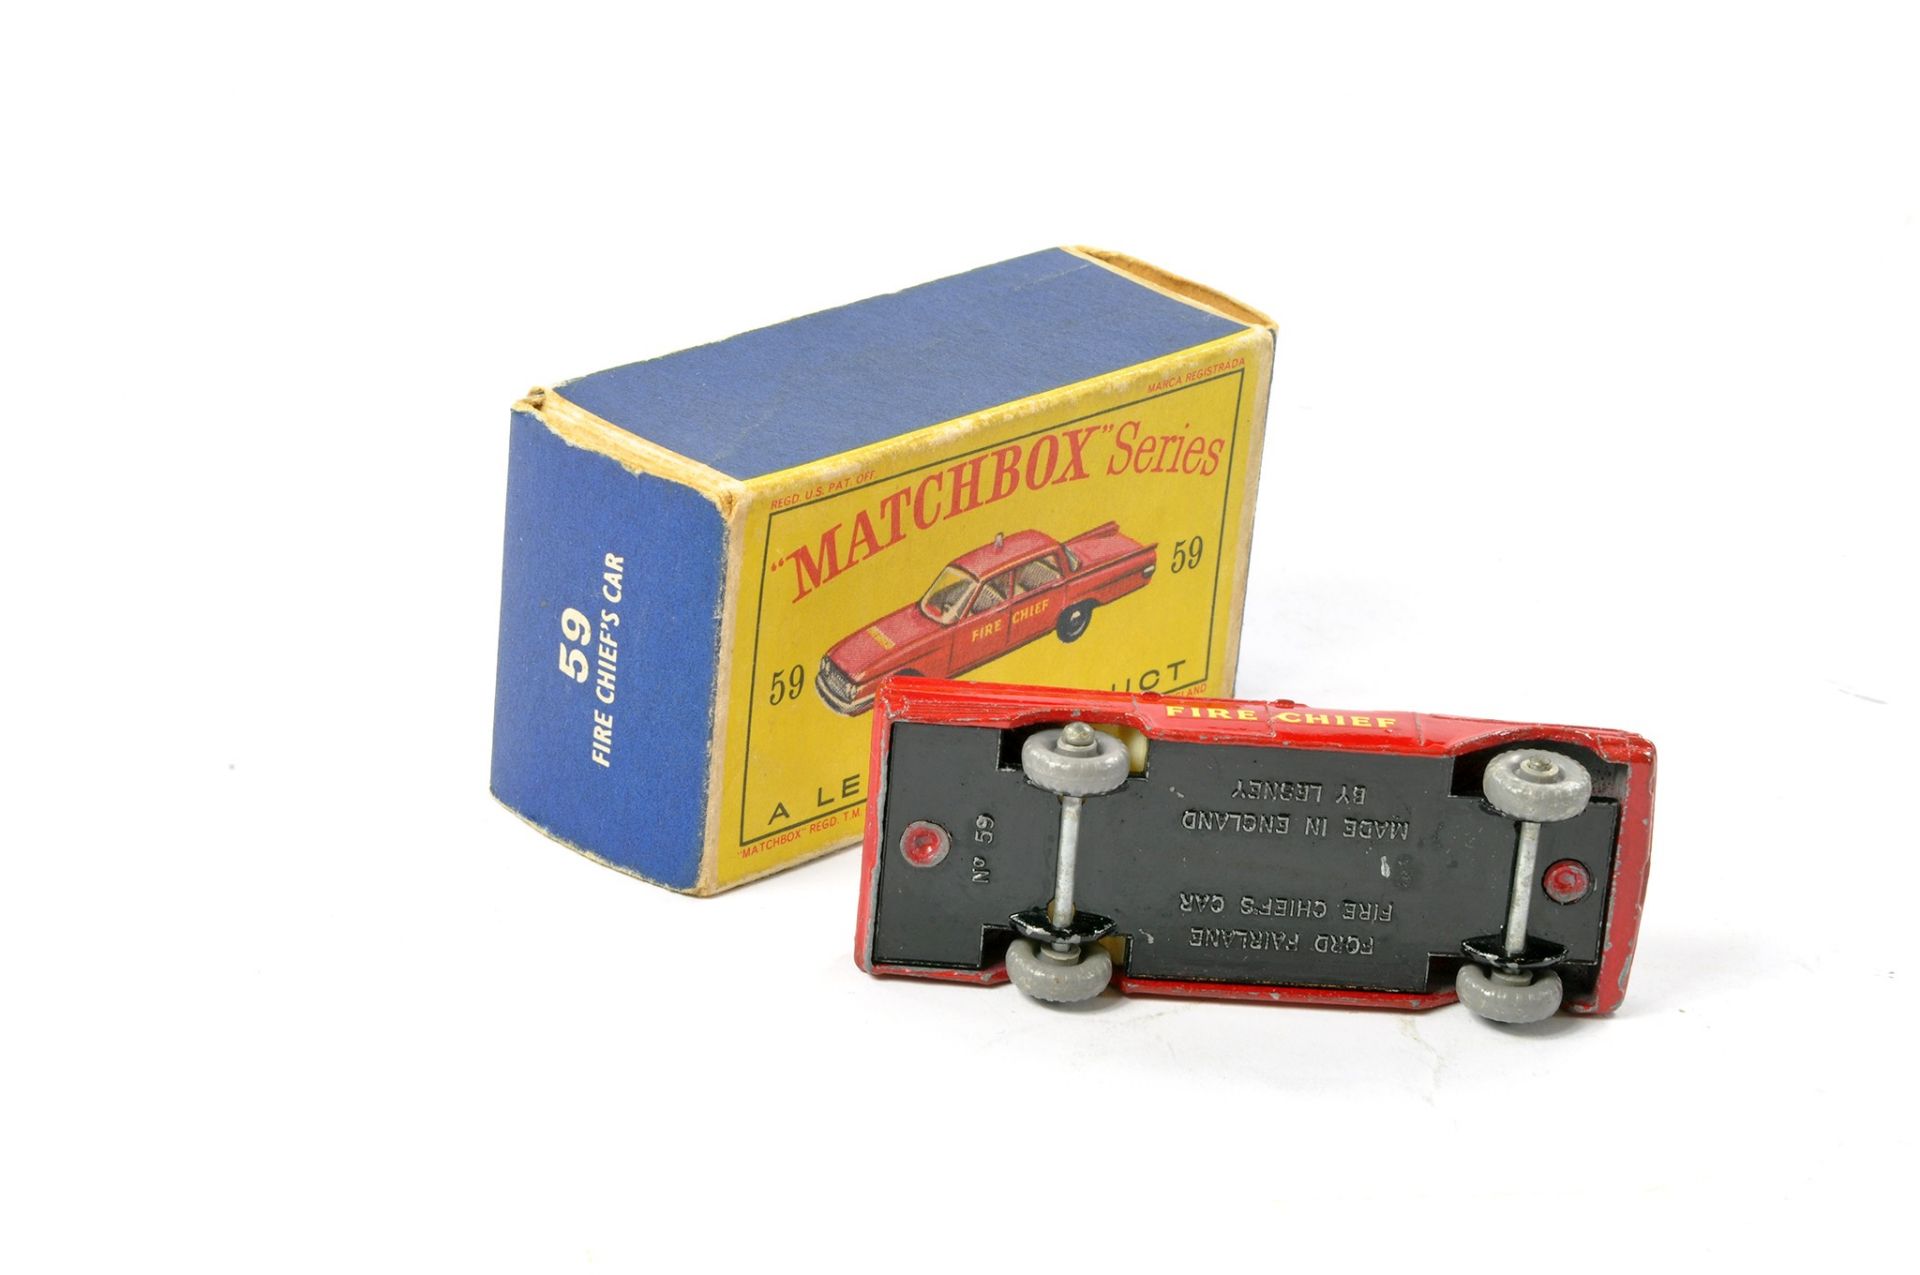 Matchbox Regular Wheels No. 59b Ford Fairlane Fire Chief Car. Red body with silver trim to front, - Image 3 of 3